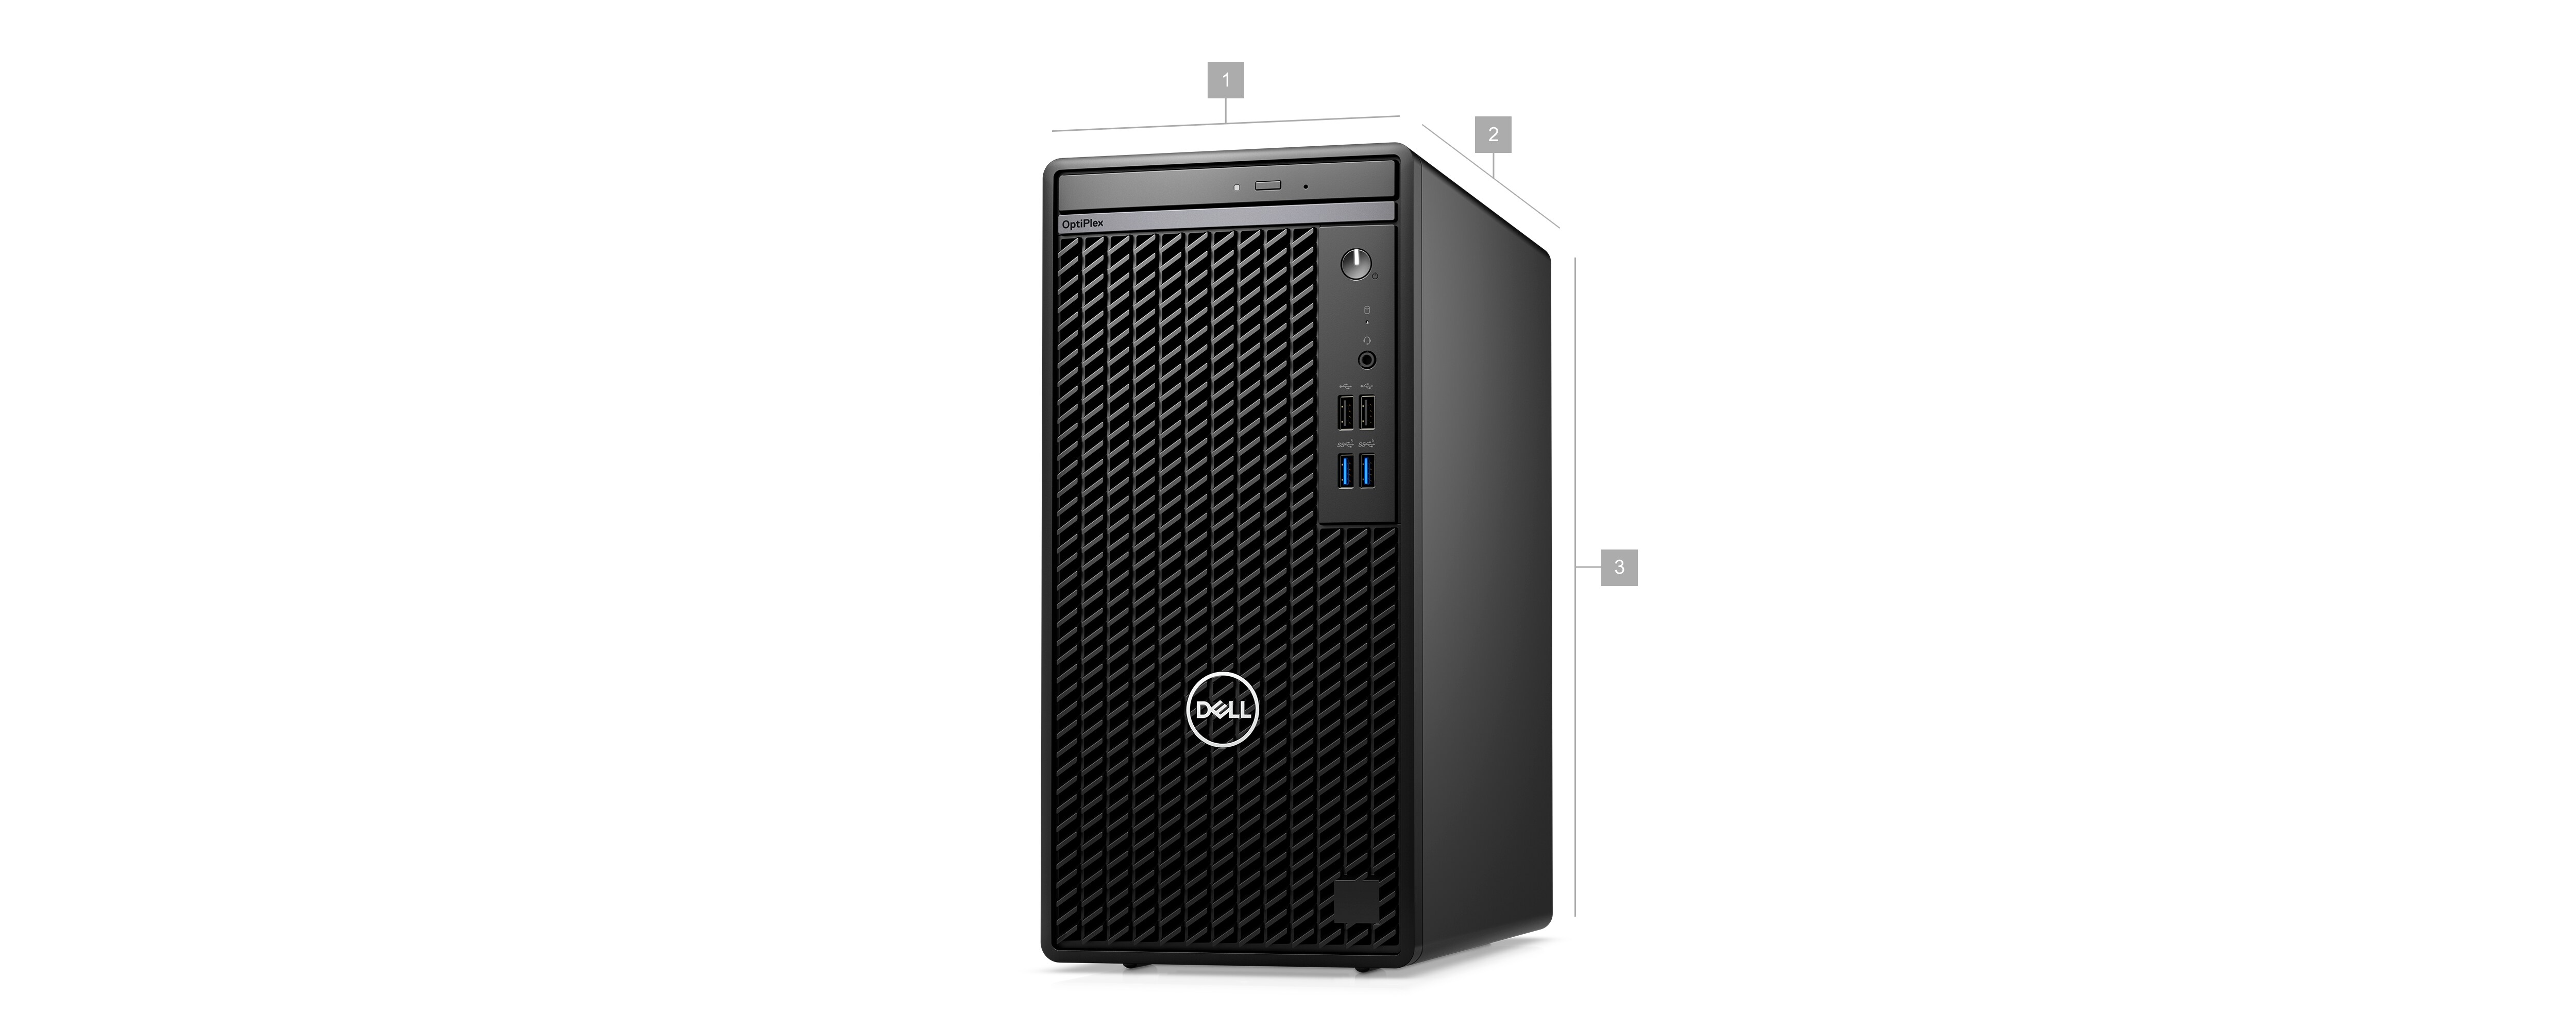 Dell OptiPlex 7010 Tower Desktop with numbers from 1 to 3 showing the product dimensions and weight.